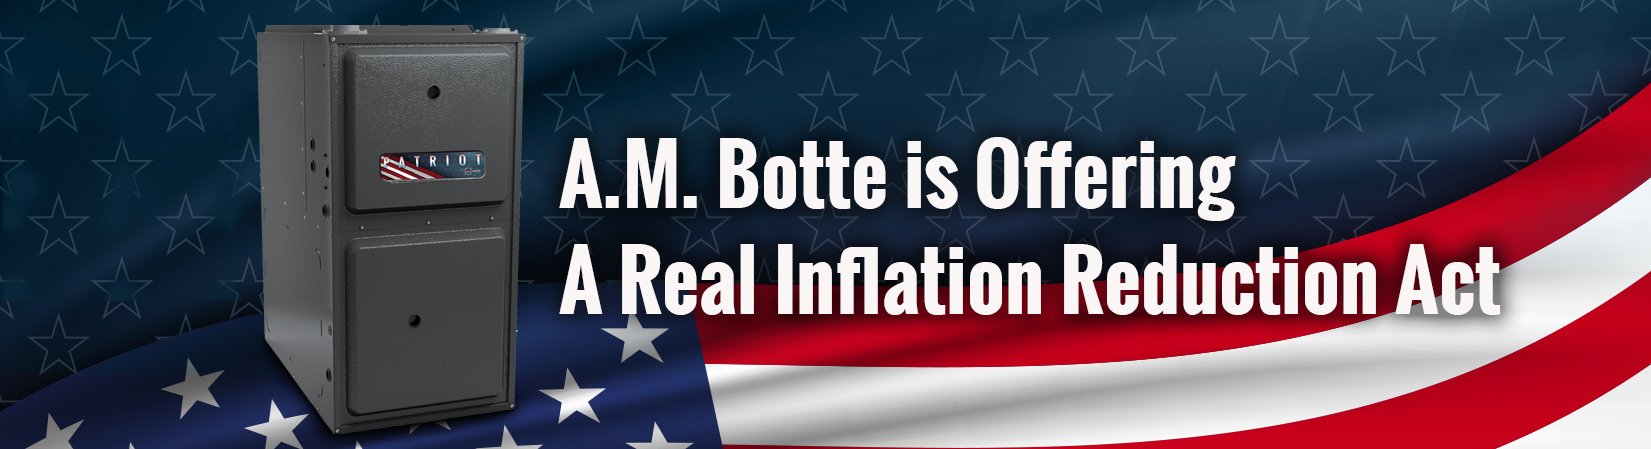 A.M. Botte is Offering A Real Inflation Reduction Act